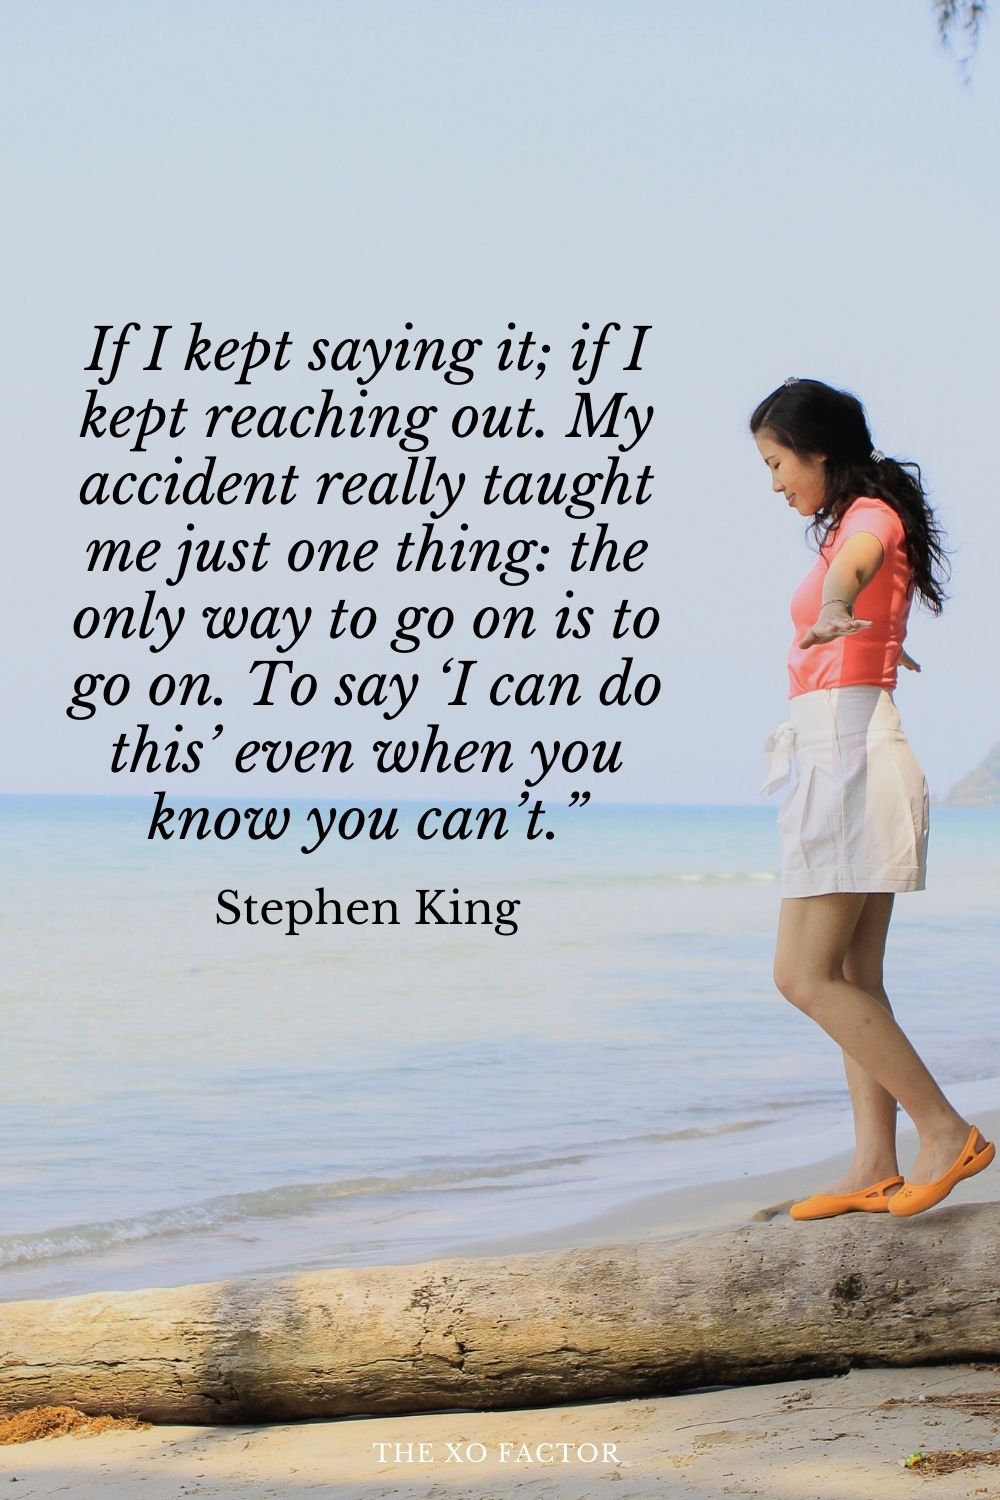 If I kept saying it; if I kept reaching out. My accident really taught me just one thing: the only way to go on is to go on. To say ‘I can do this’ even when you know you can’t.” Stephen King